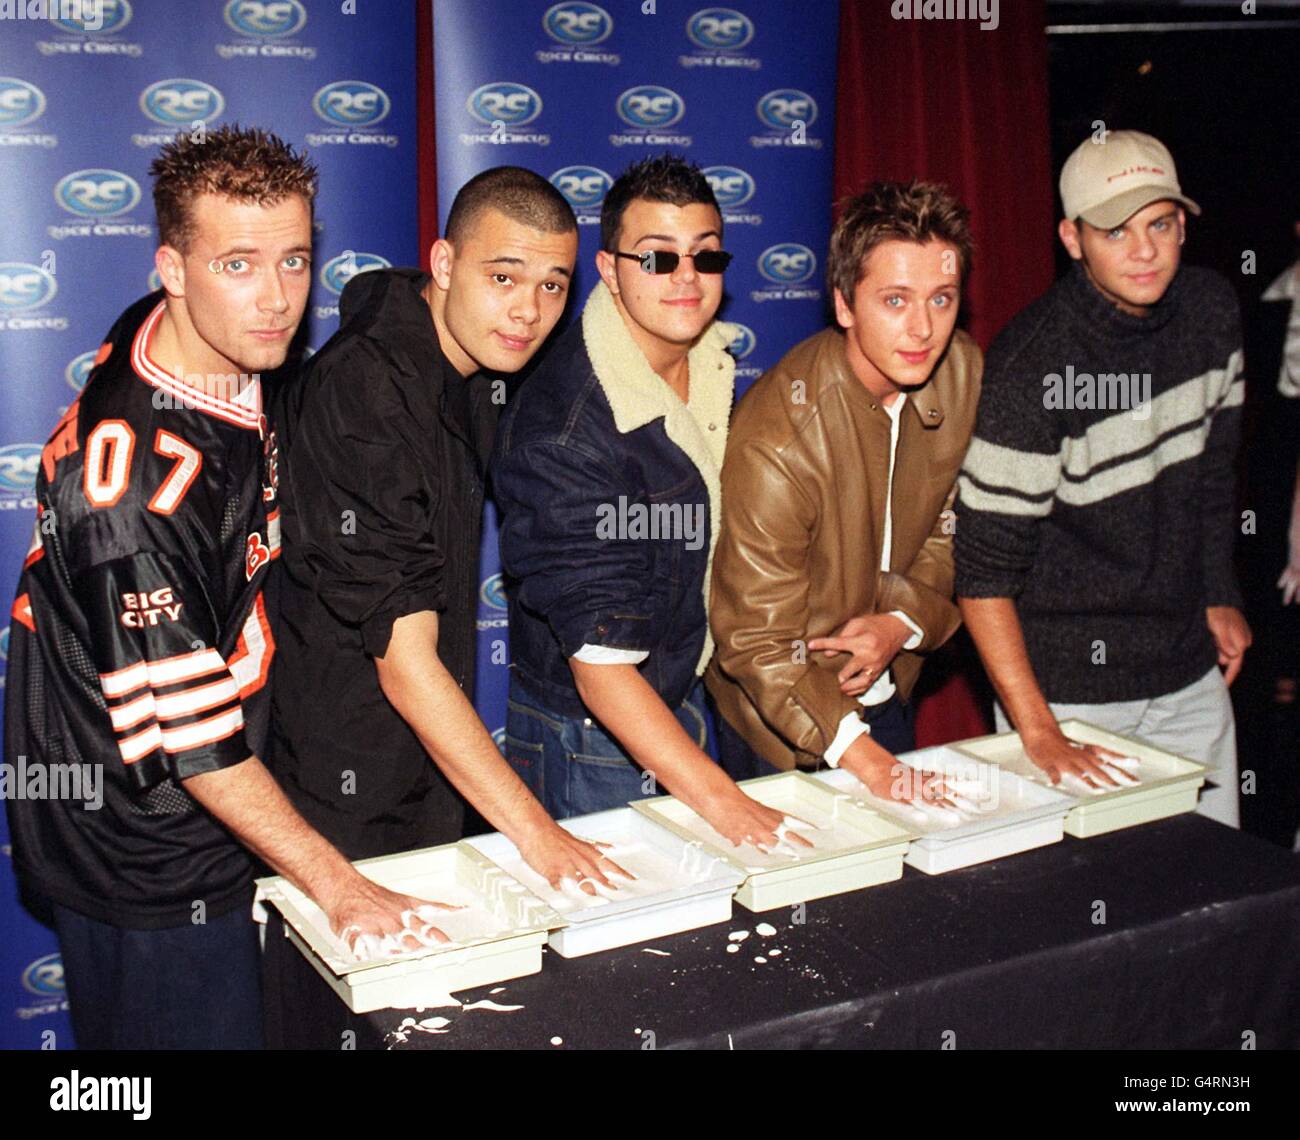 Pop band Five (L-R) J (Jason) Brown, Sean Conlon, Scott Robinson, Ritchie Neville and Abs (Richard) Breen having their hands cast for the 'Wall of Hands' at Madame Tussaud's Rock Circus. Stock Photo